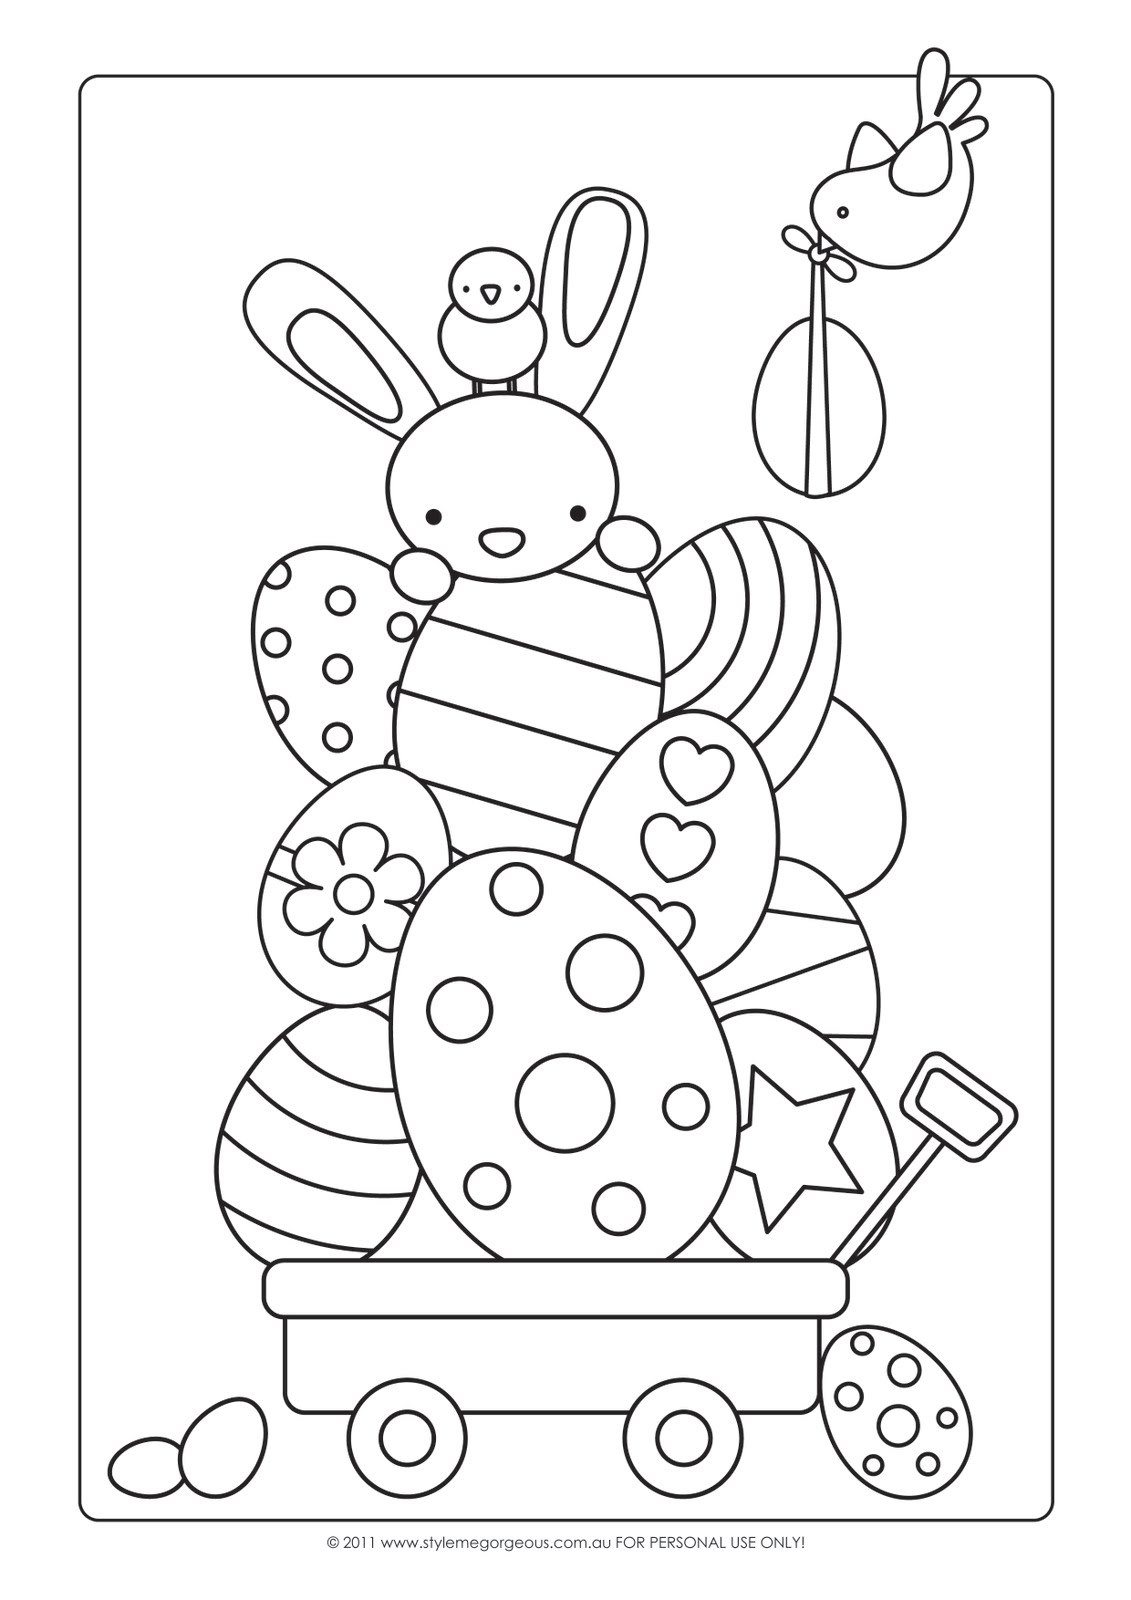 Style Me Gorgeous: FREE Easter Colour-in Page